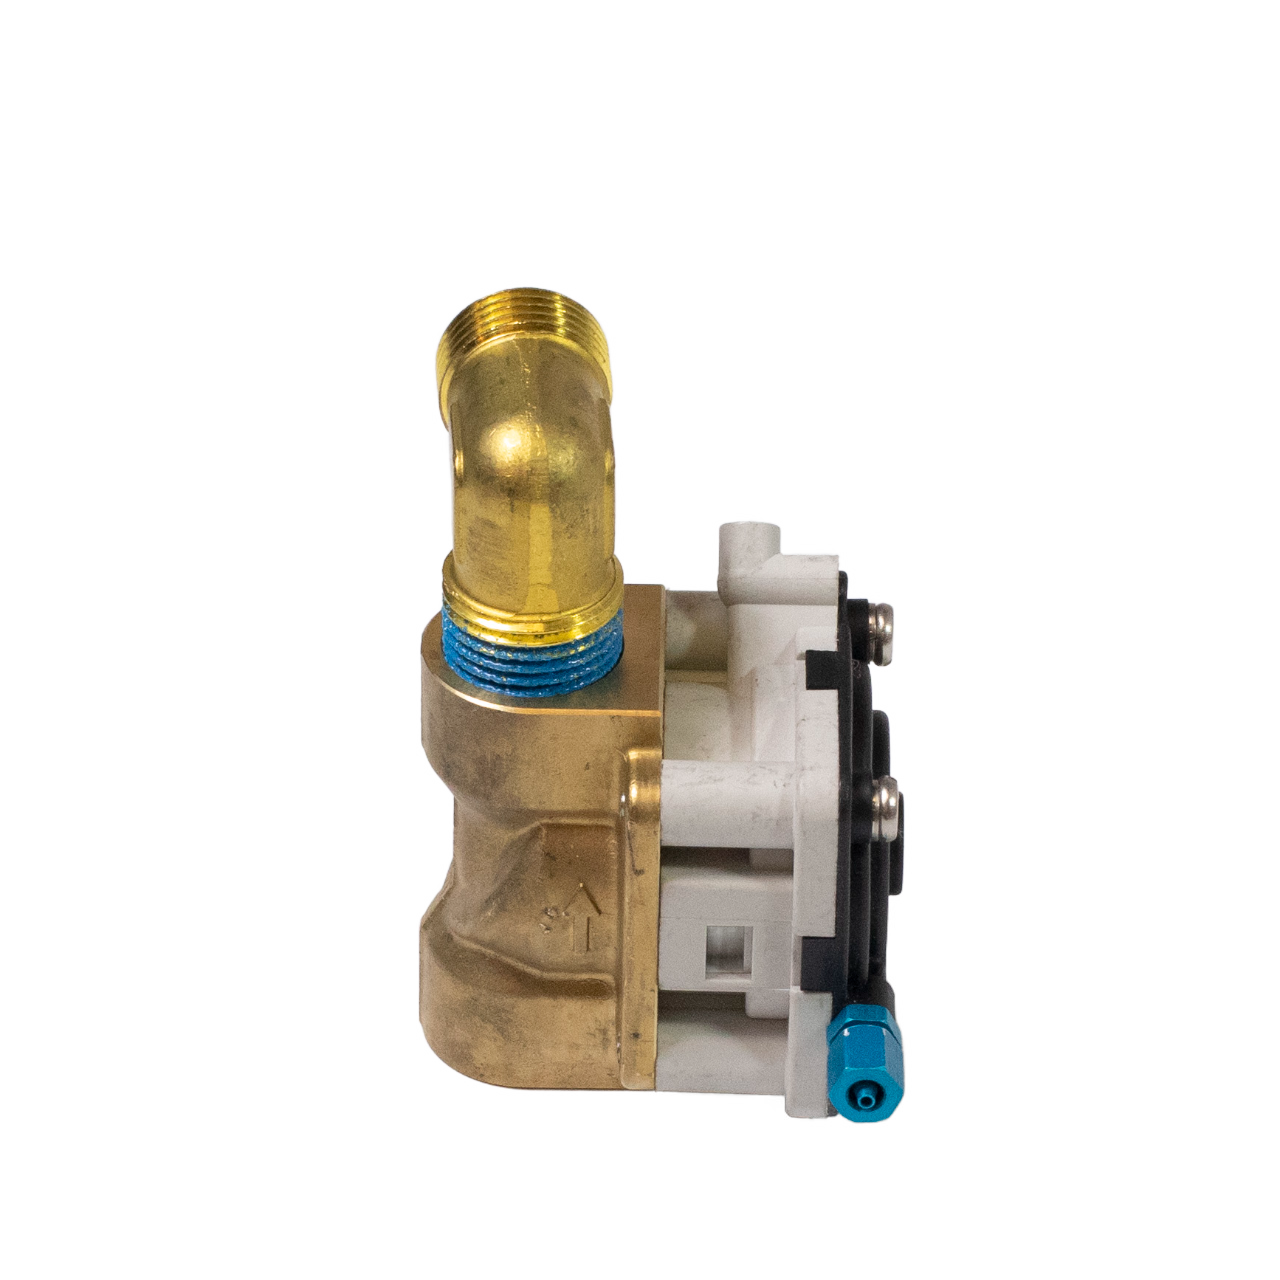 P5015C - Valve for Foot Operated Sanispray Washfountains with Copper Manifold  Intersan/AquaDesign